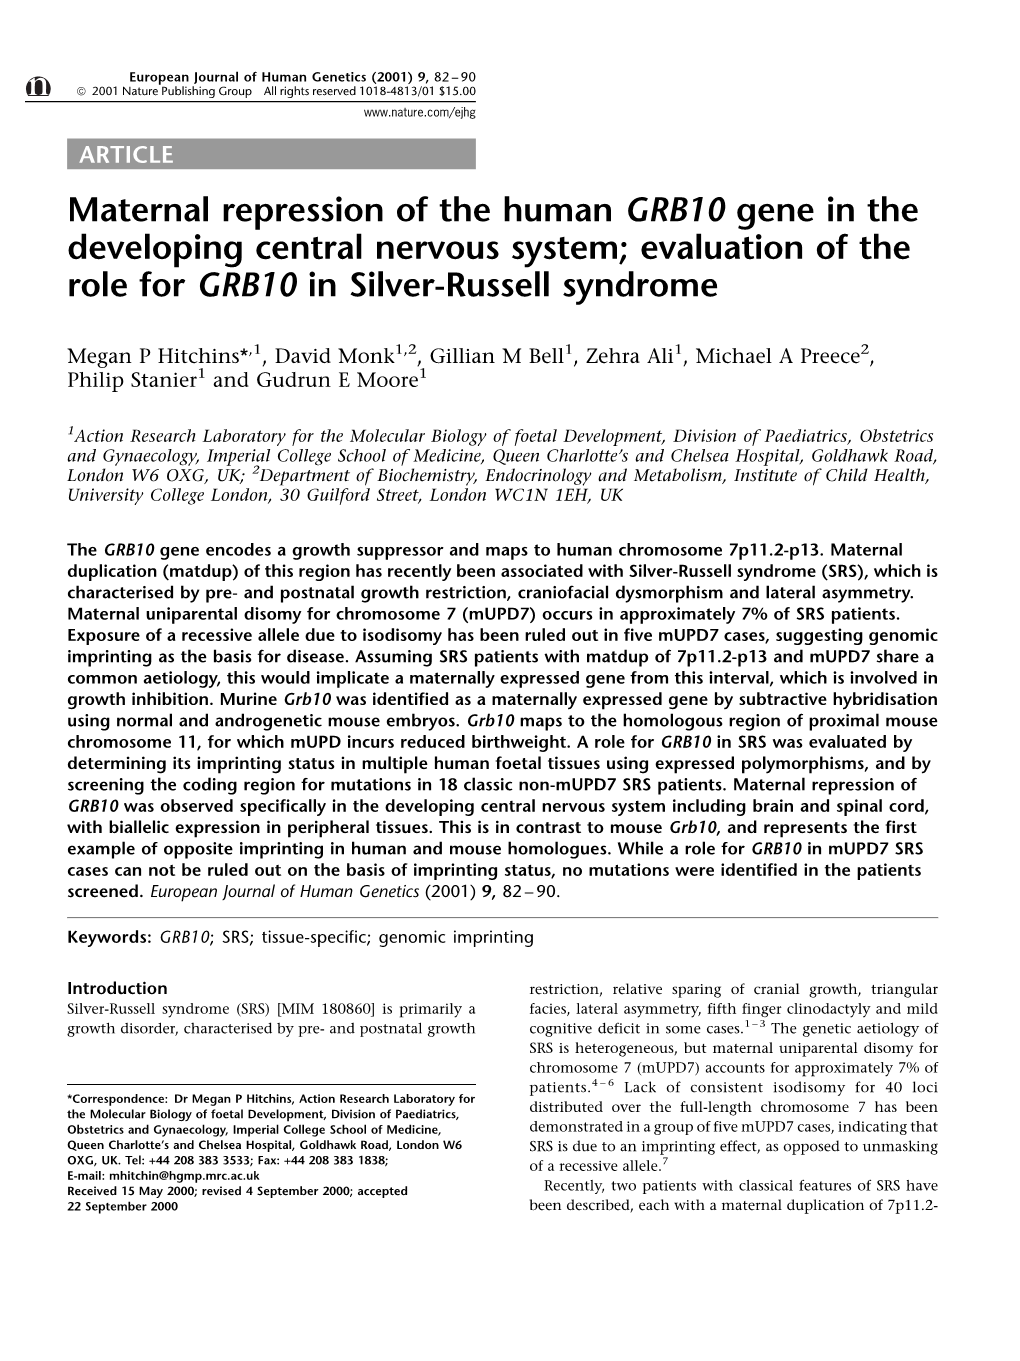 Maternal Repression of the Human GRB10 Gene in the Developing Central Nervous System; Evaluation of the Role for GRB10 in Silver-Russell Syndrome